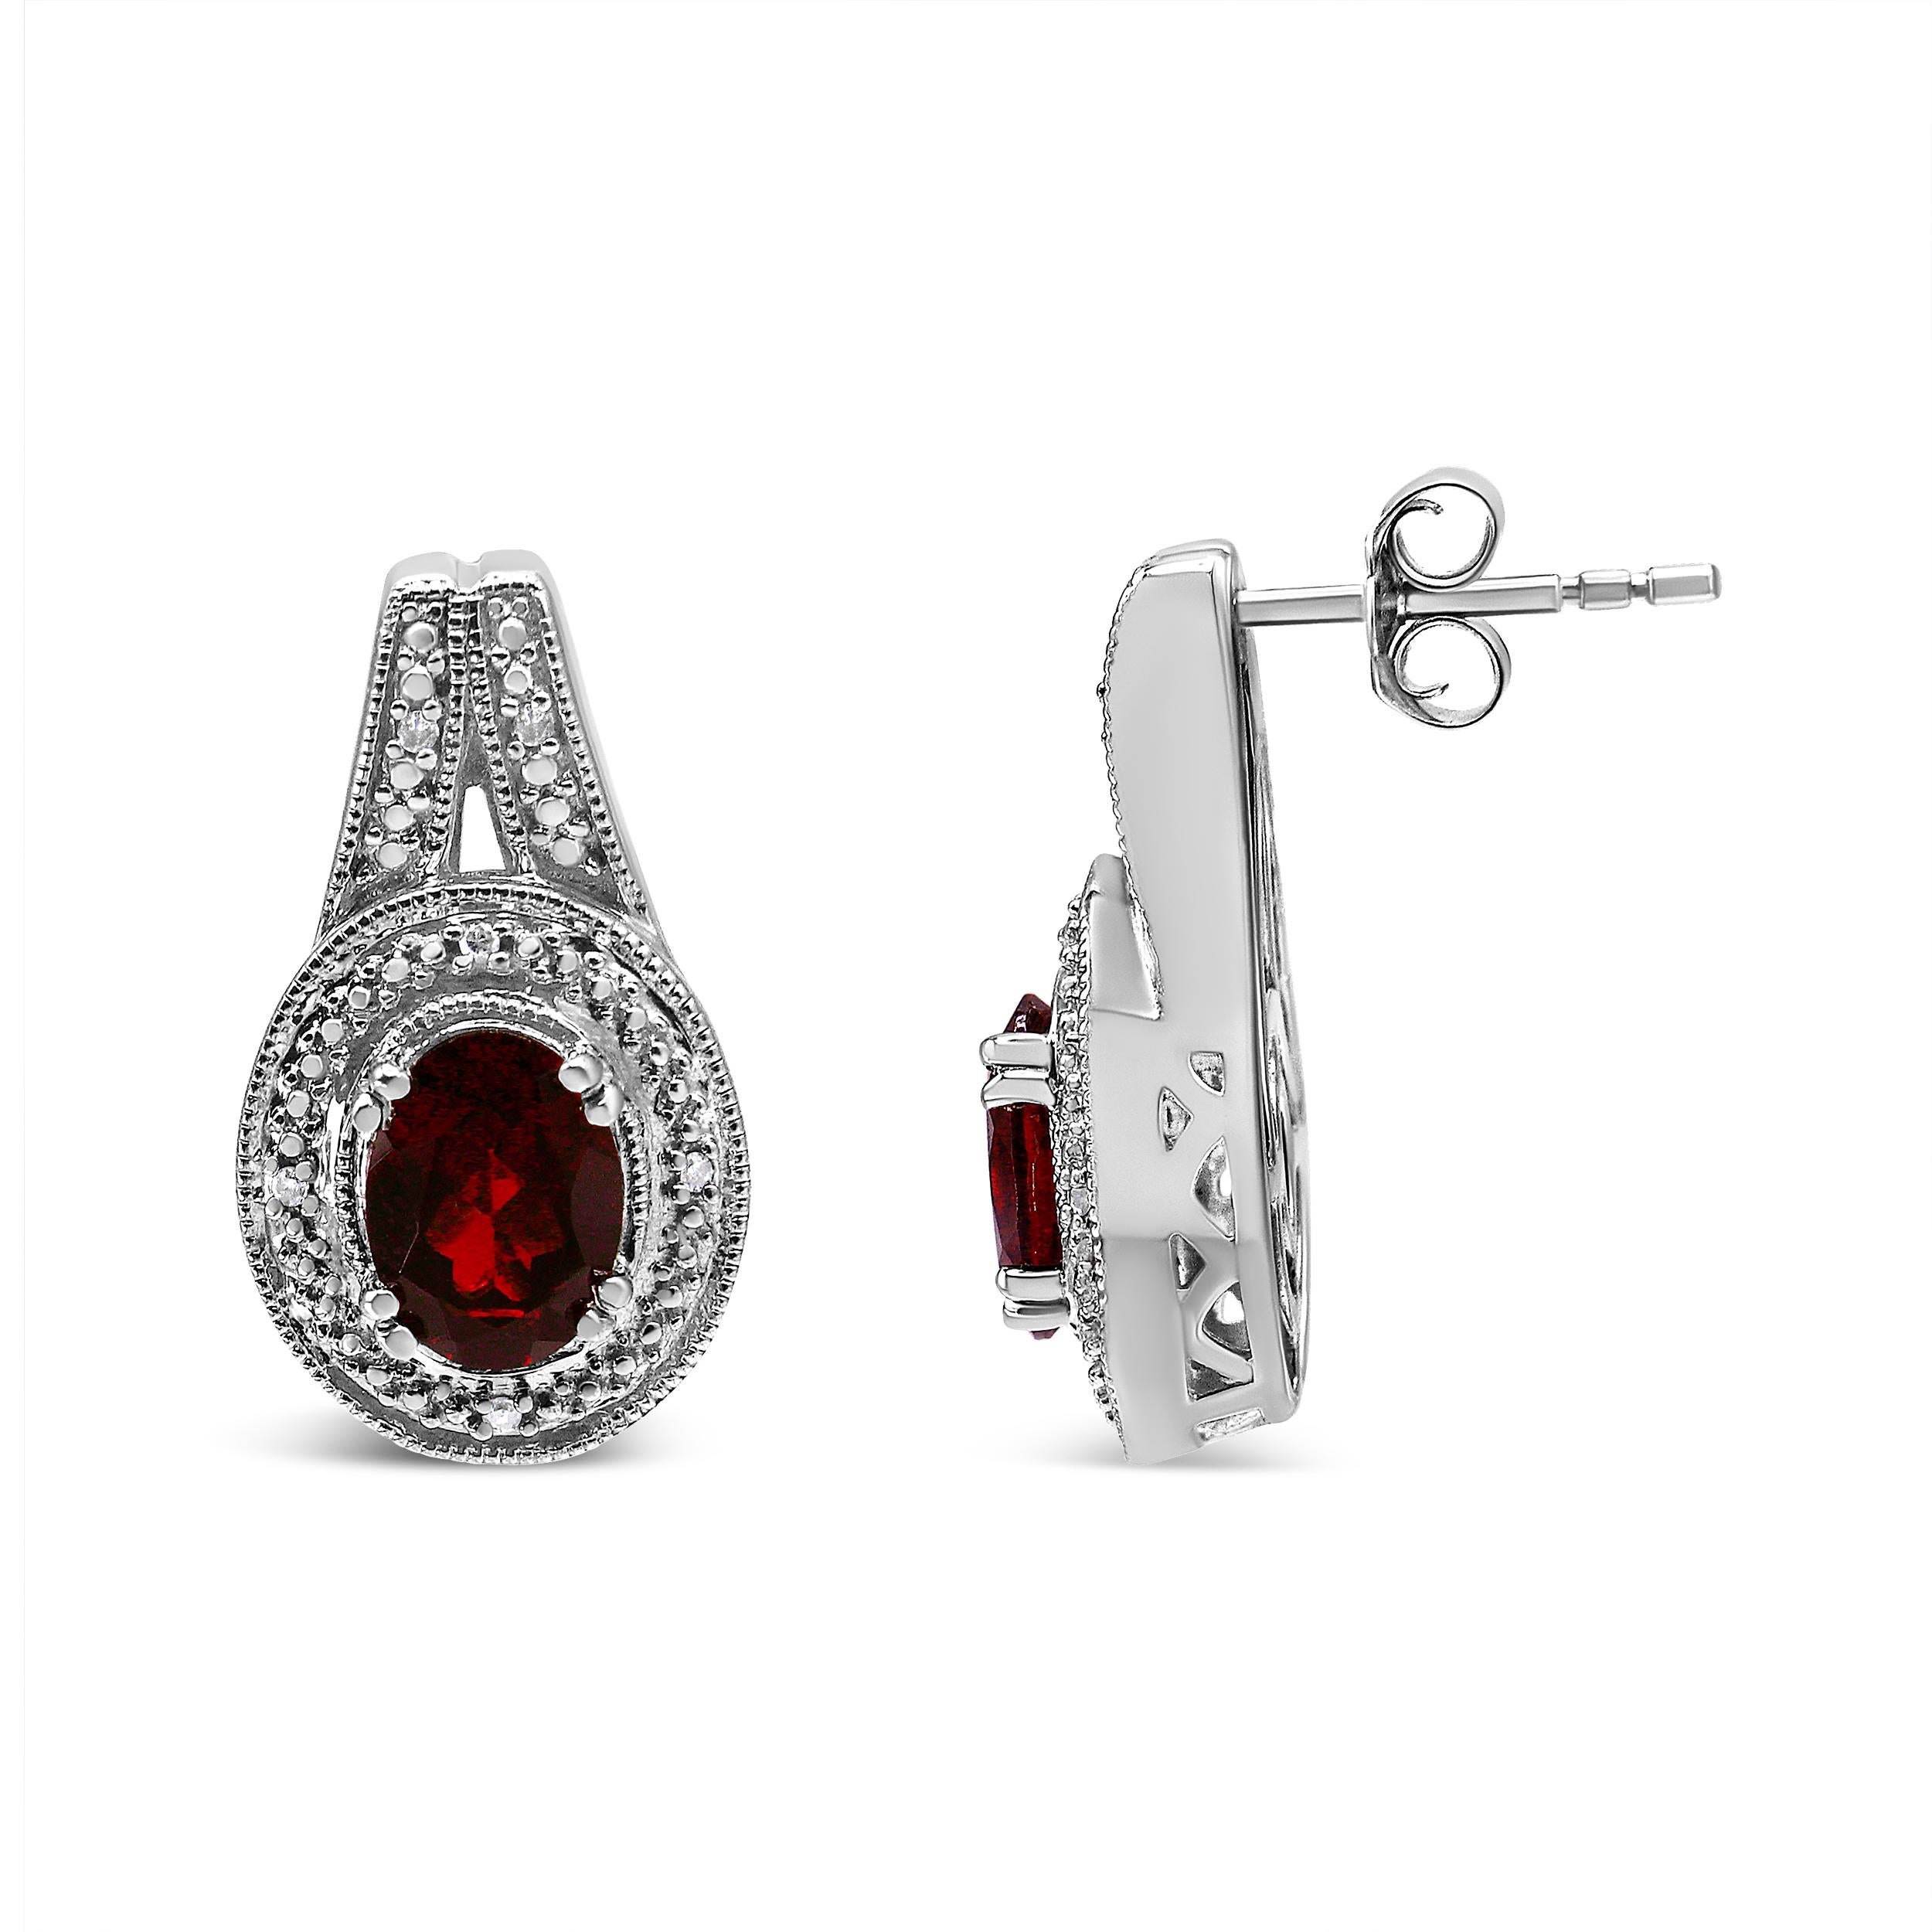 Contemporary .925 Sterling Silver Diamond Accent and 8x6mm Red Oval Garnet Stud Earrings For Sale